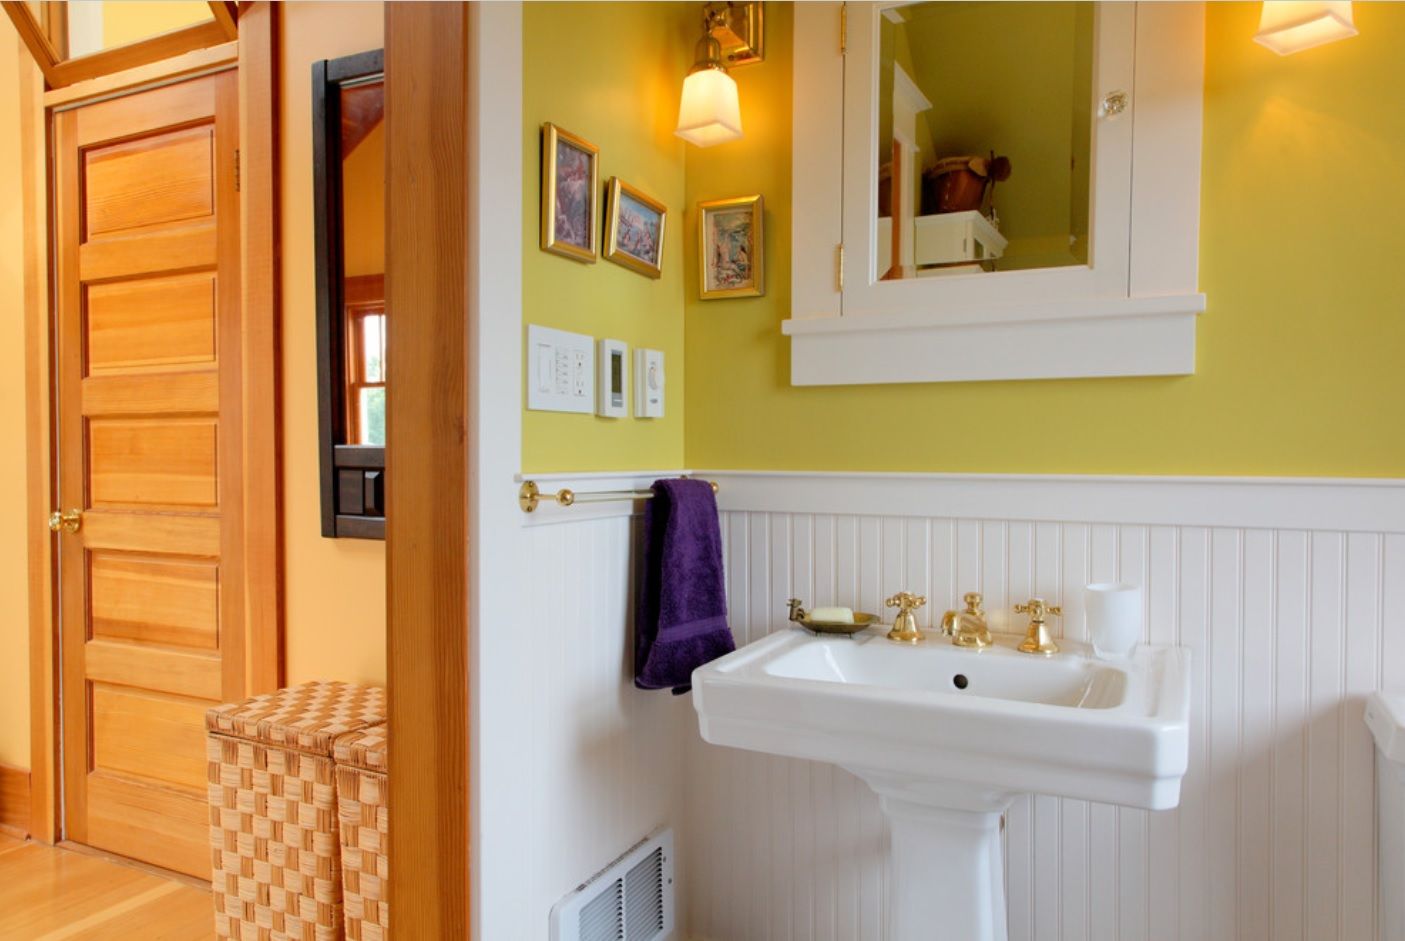 Bathroom with Wainscoting Design Ideas. Yellow wall paint and white matted wooden panels